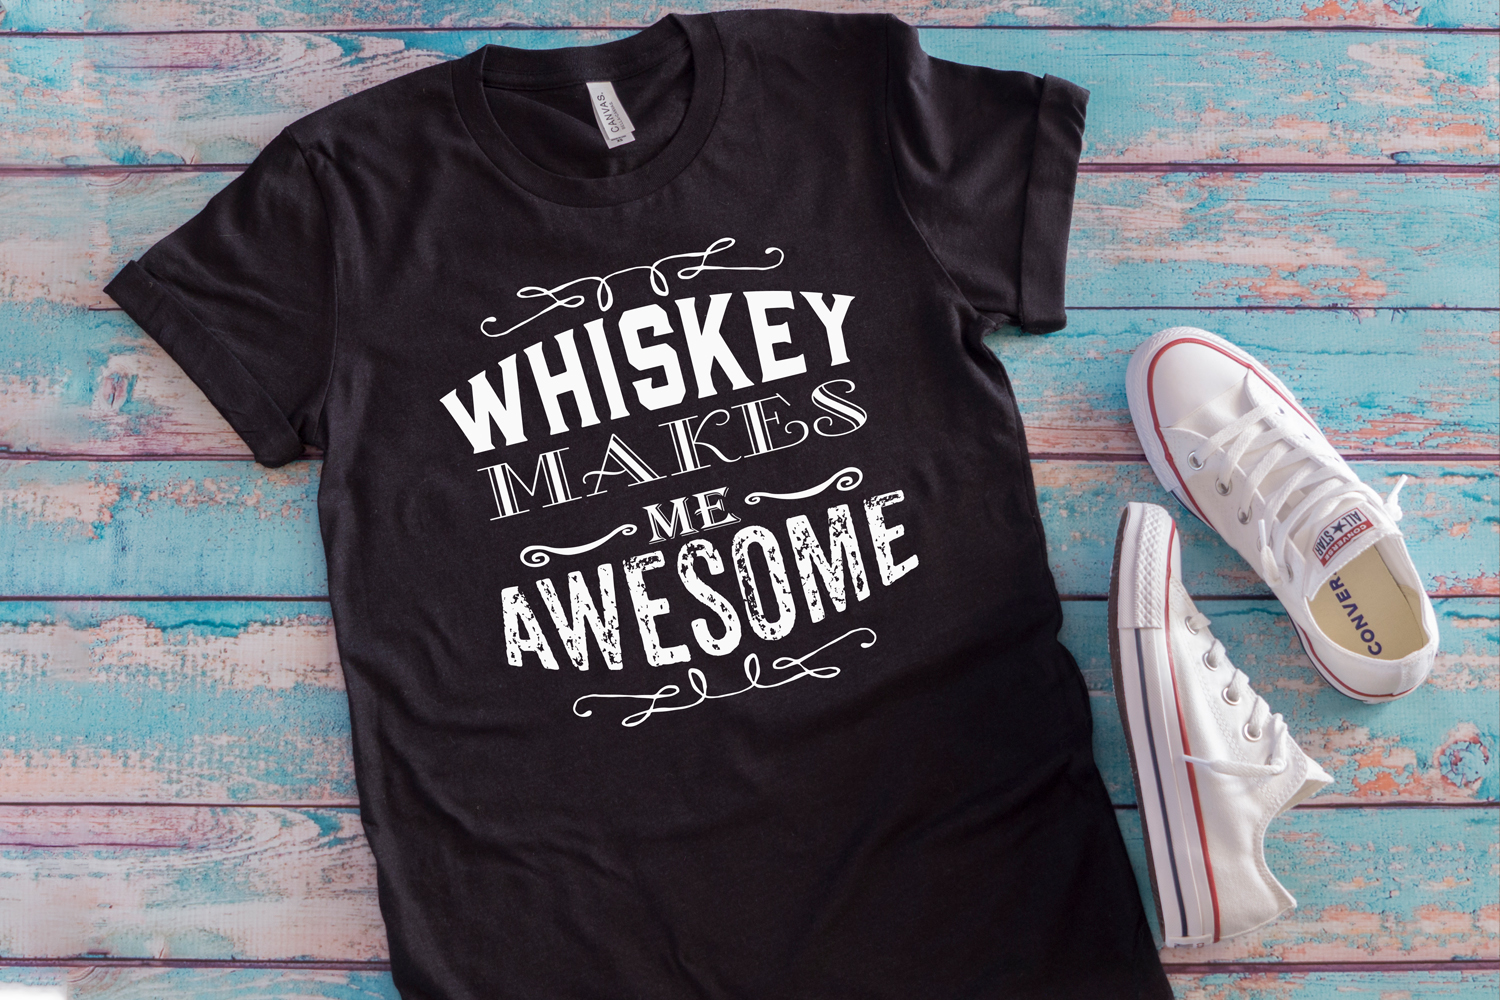 Download Whiskey makes me awesome T-shirt svg design